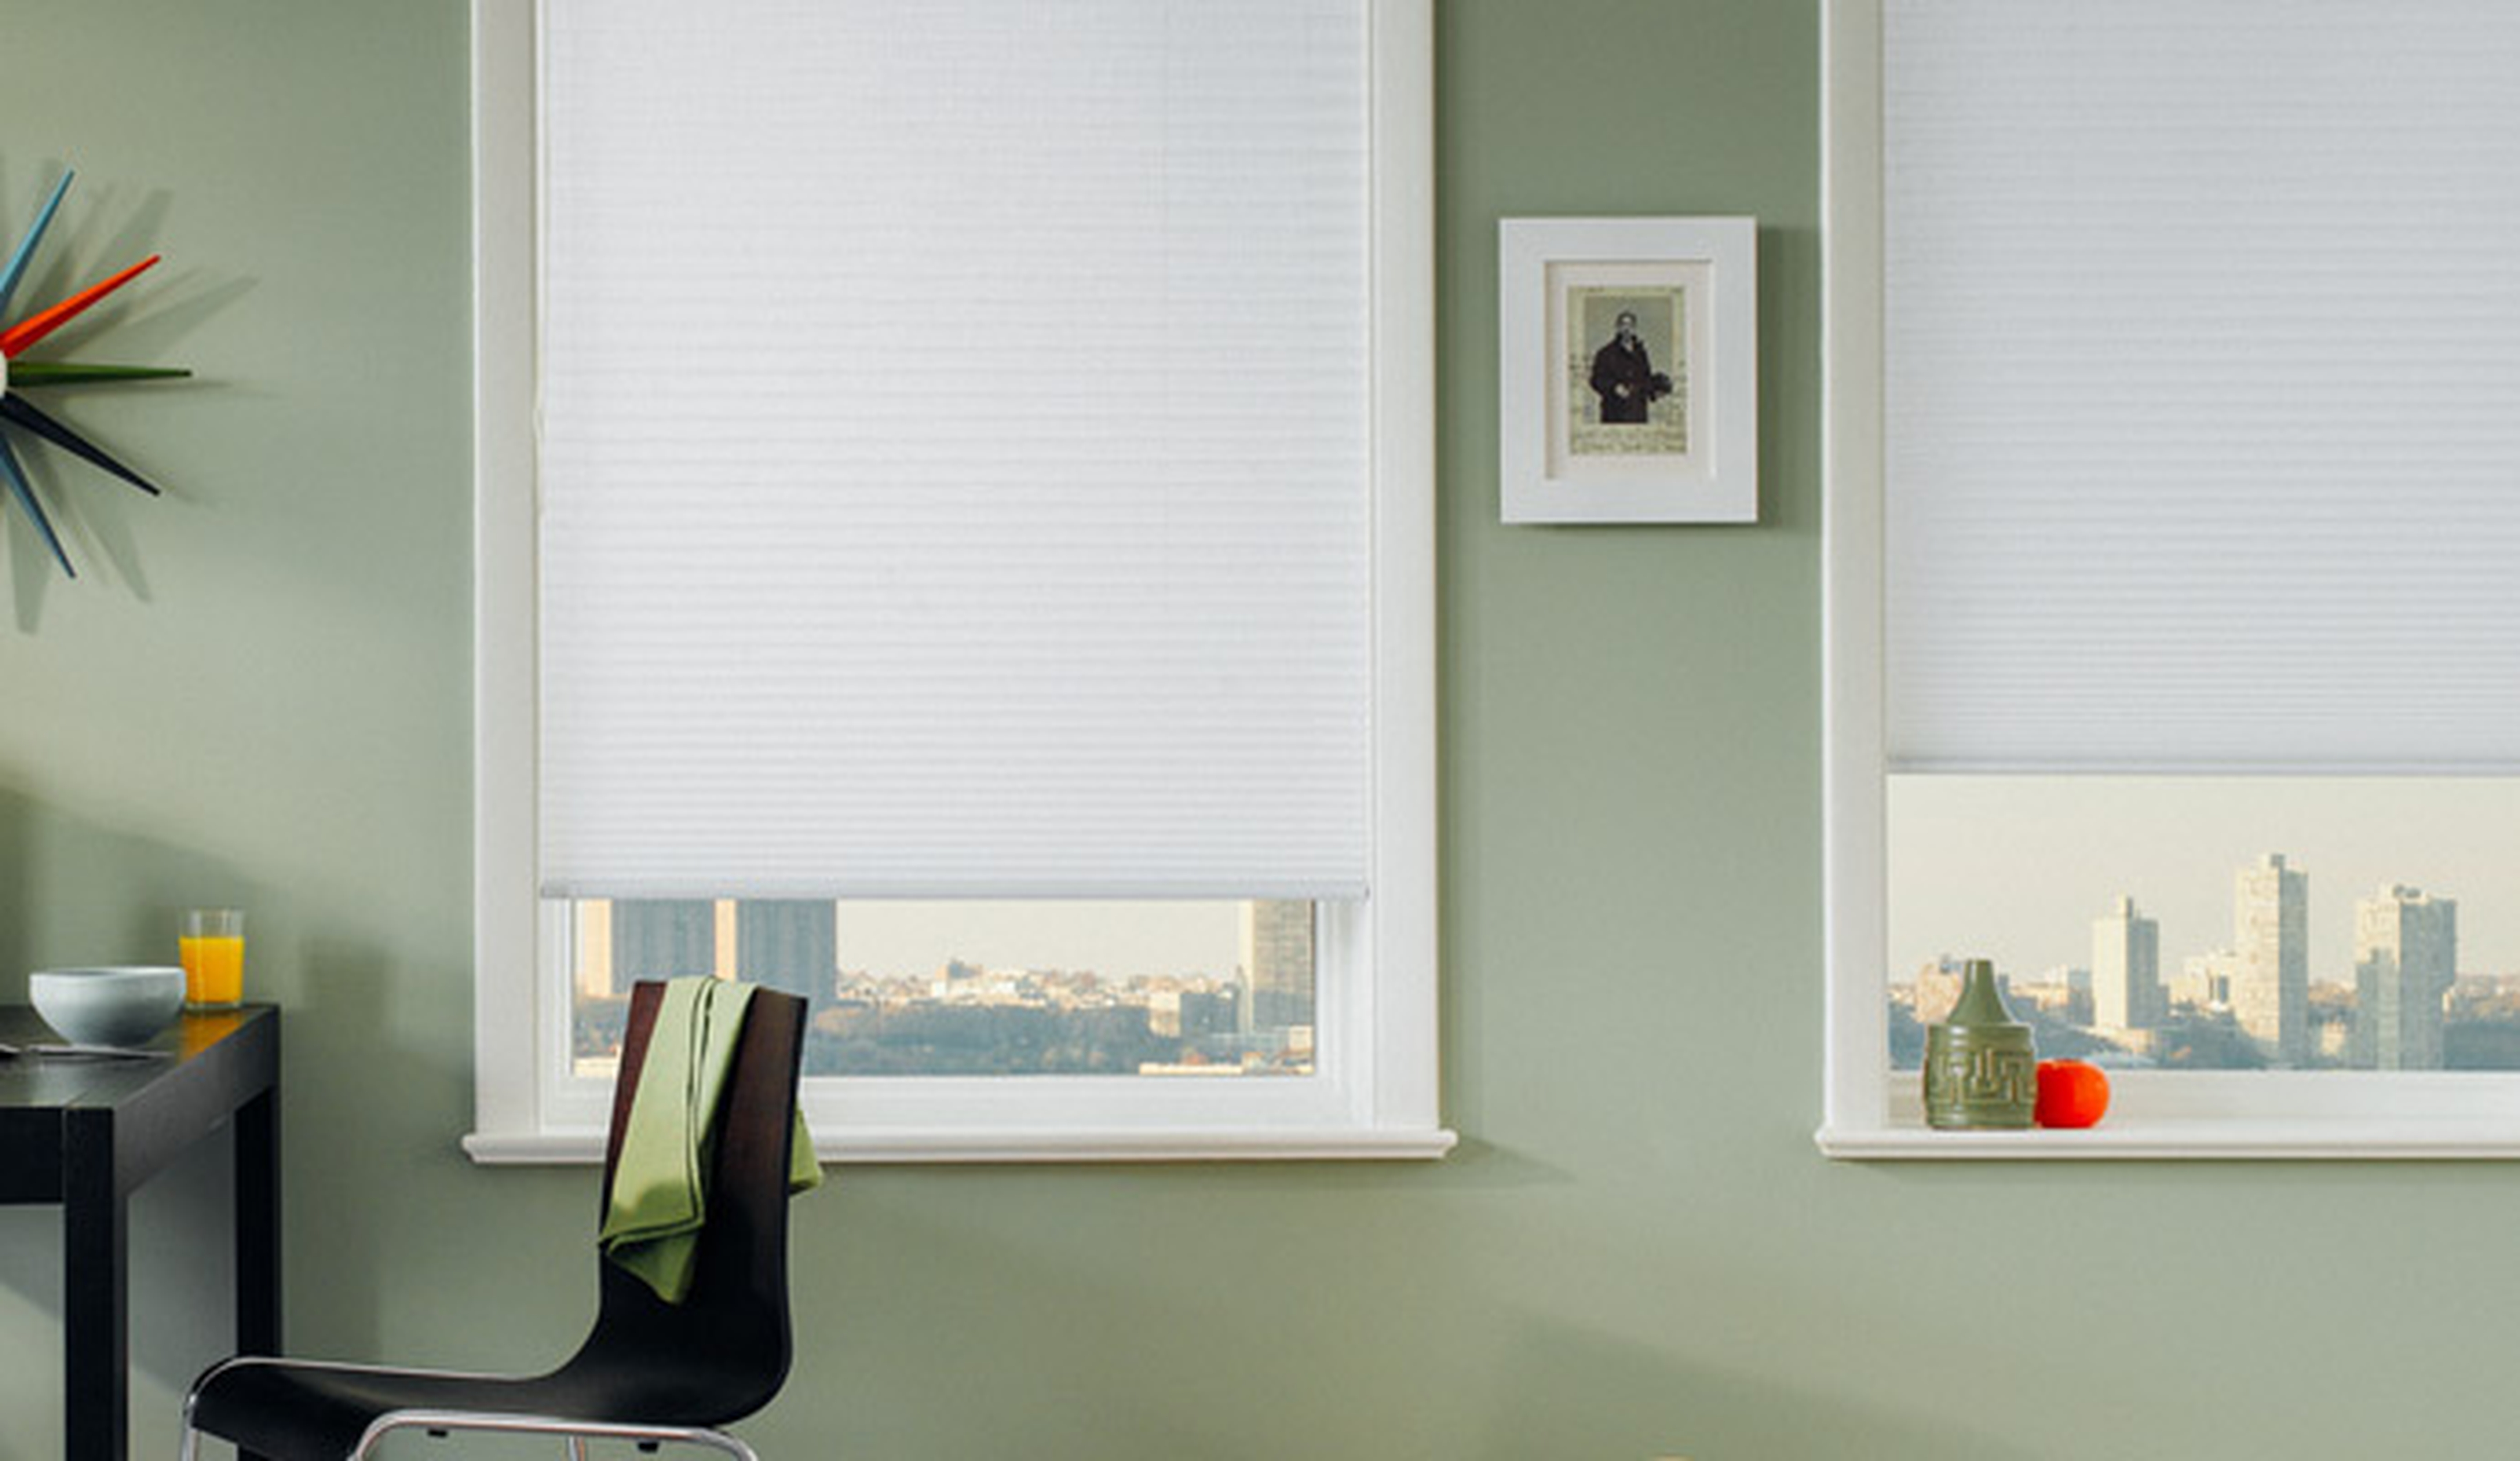 CUSTOM: Cellular Shades - 3/8" Double Cell Blackout - Winter - Inside Mount - Cordless control - The Shade Store